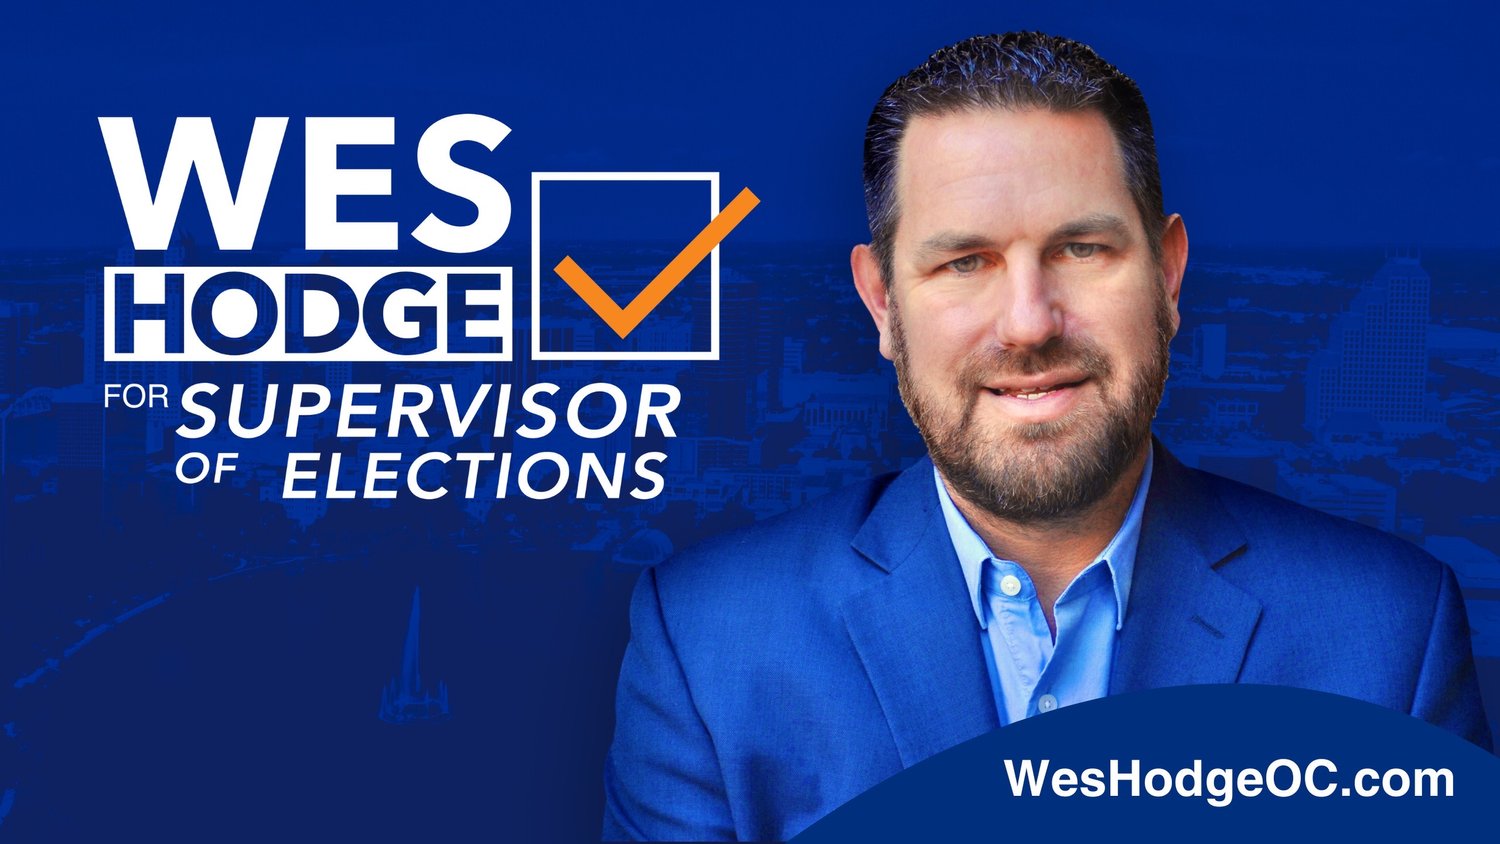 Wes Hodge for Supervisor